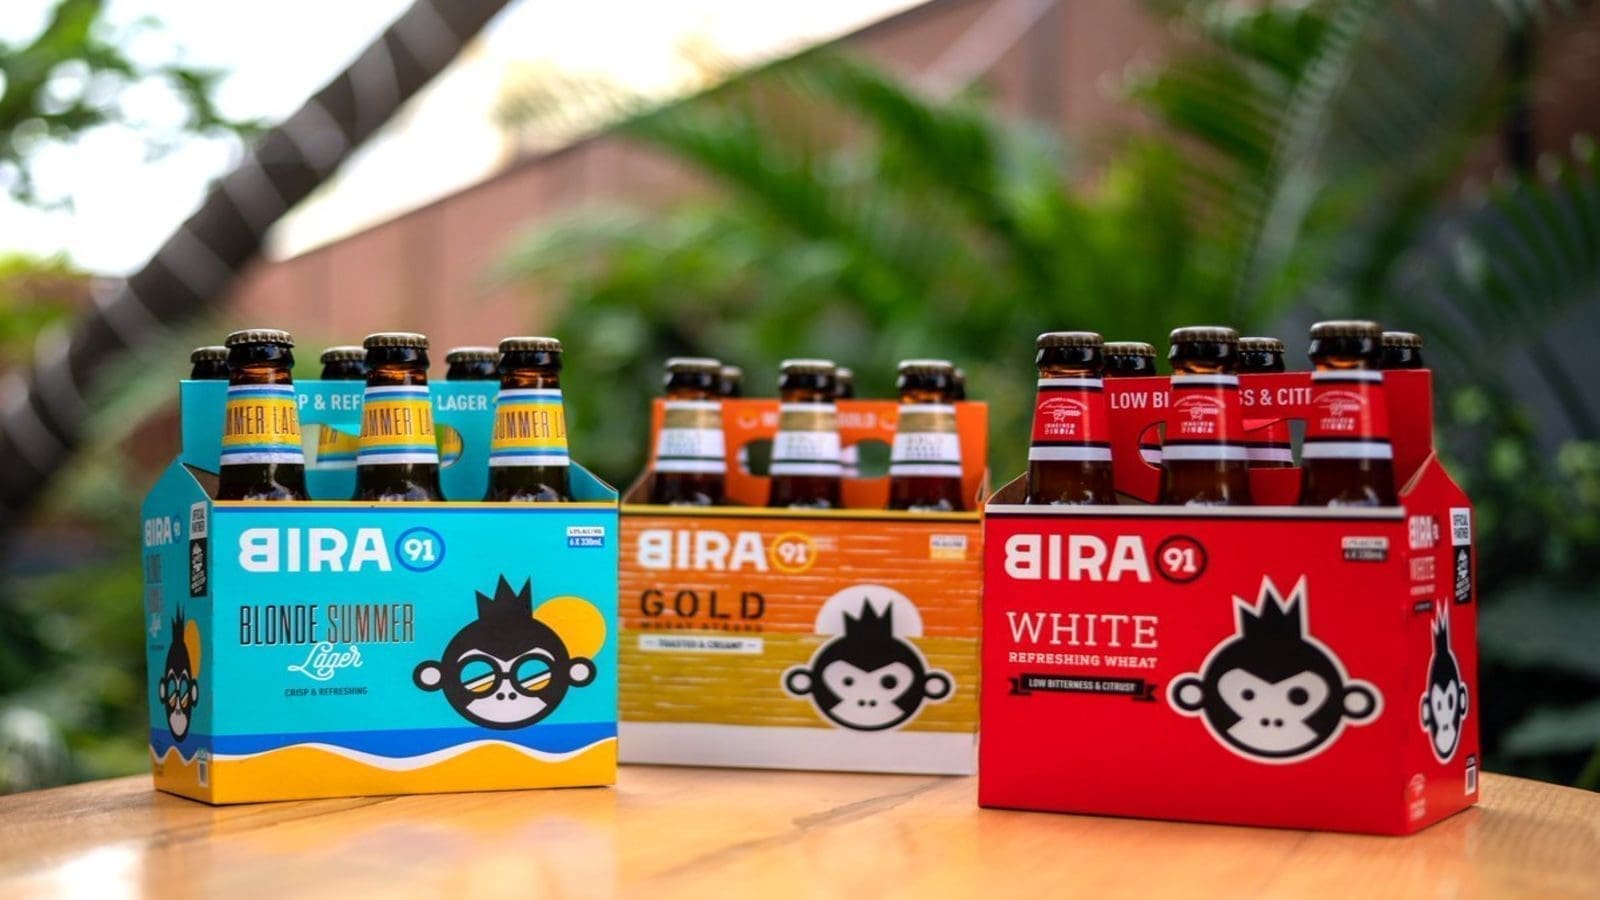 Indian craft-beer brand Bira 91 to open fifth brewery to capture rising demand for flavorsome tipples